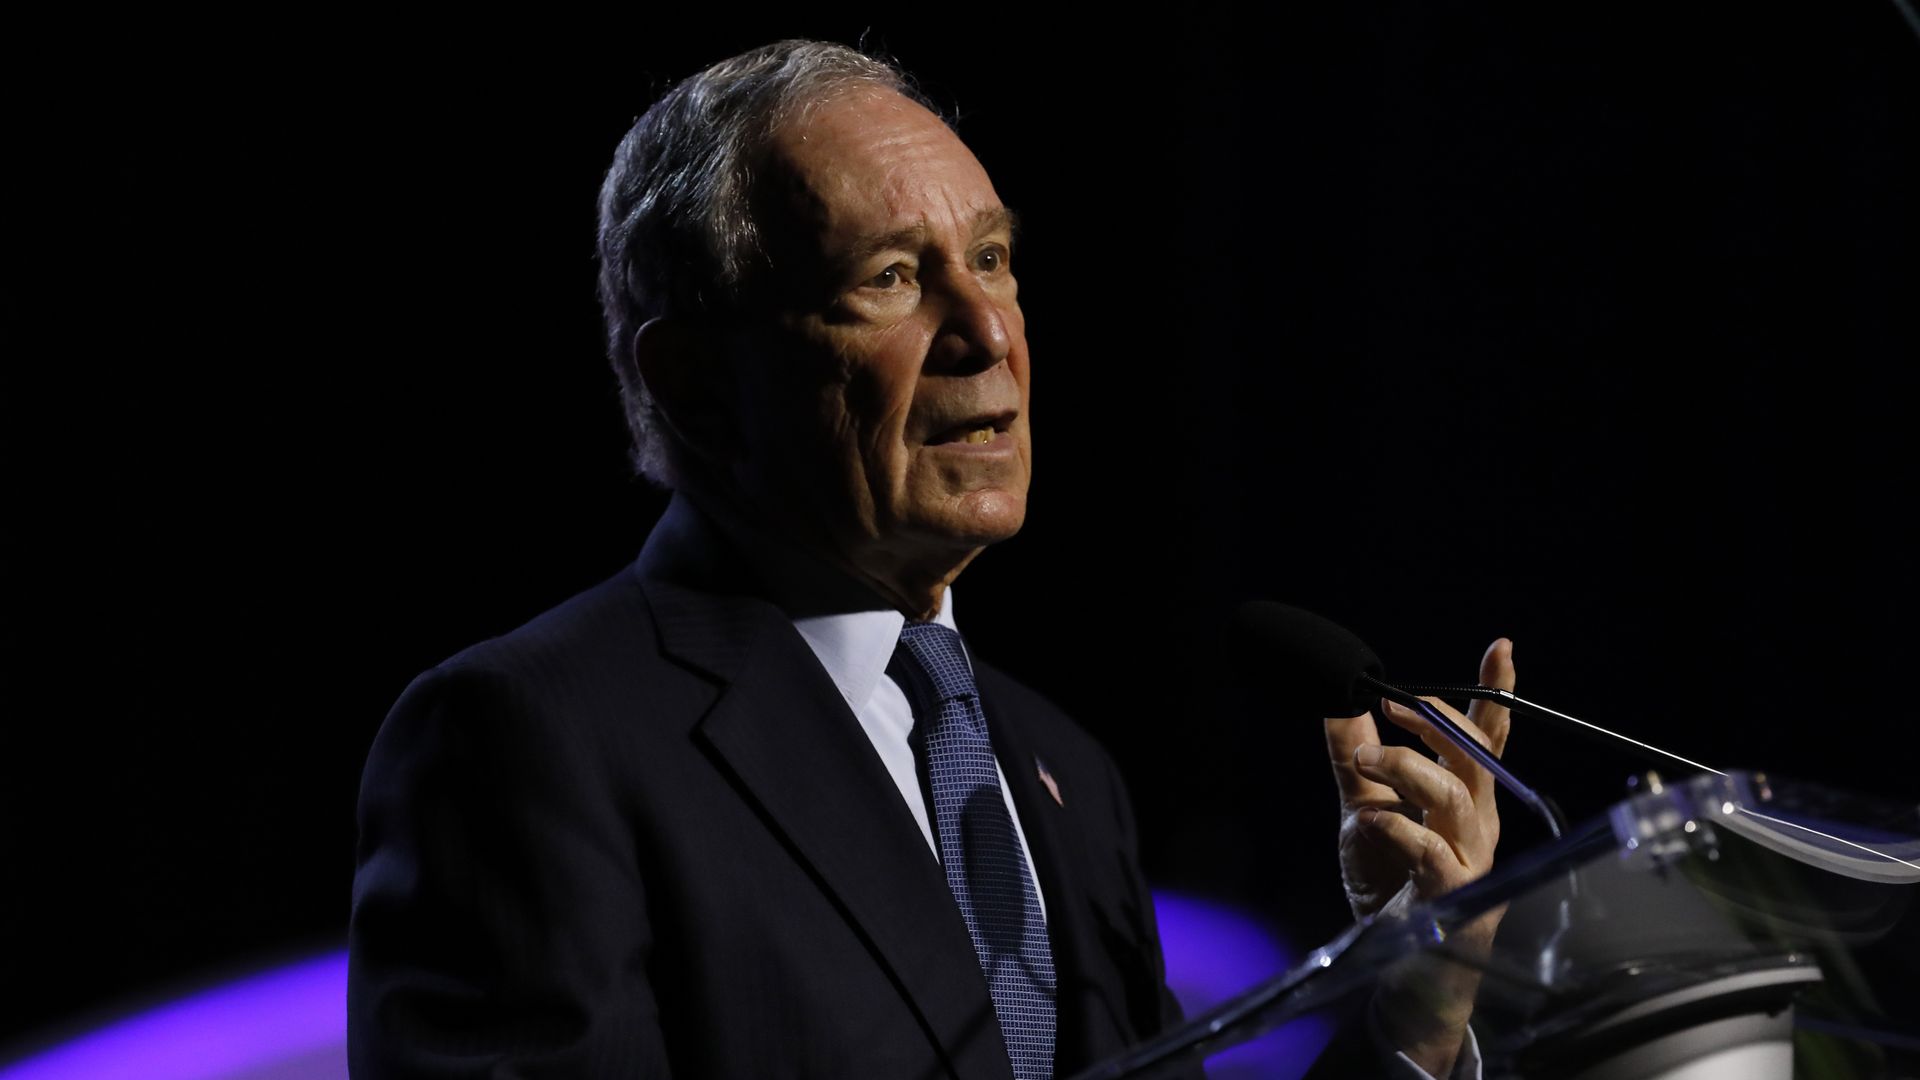  Michael Bloomberg, addresses the NAACP's 110th National Convention at Cobo Center on July 24, 2019 in Detroit, Michigan.